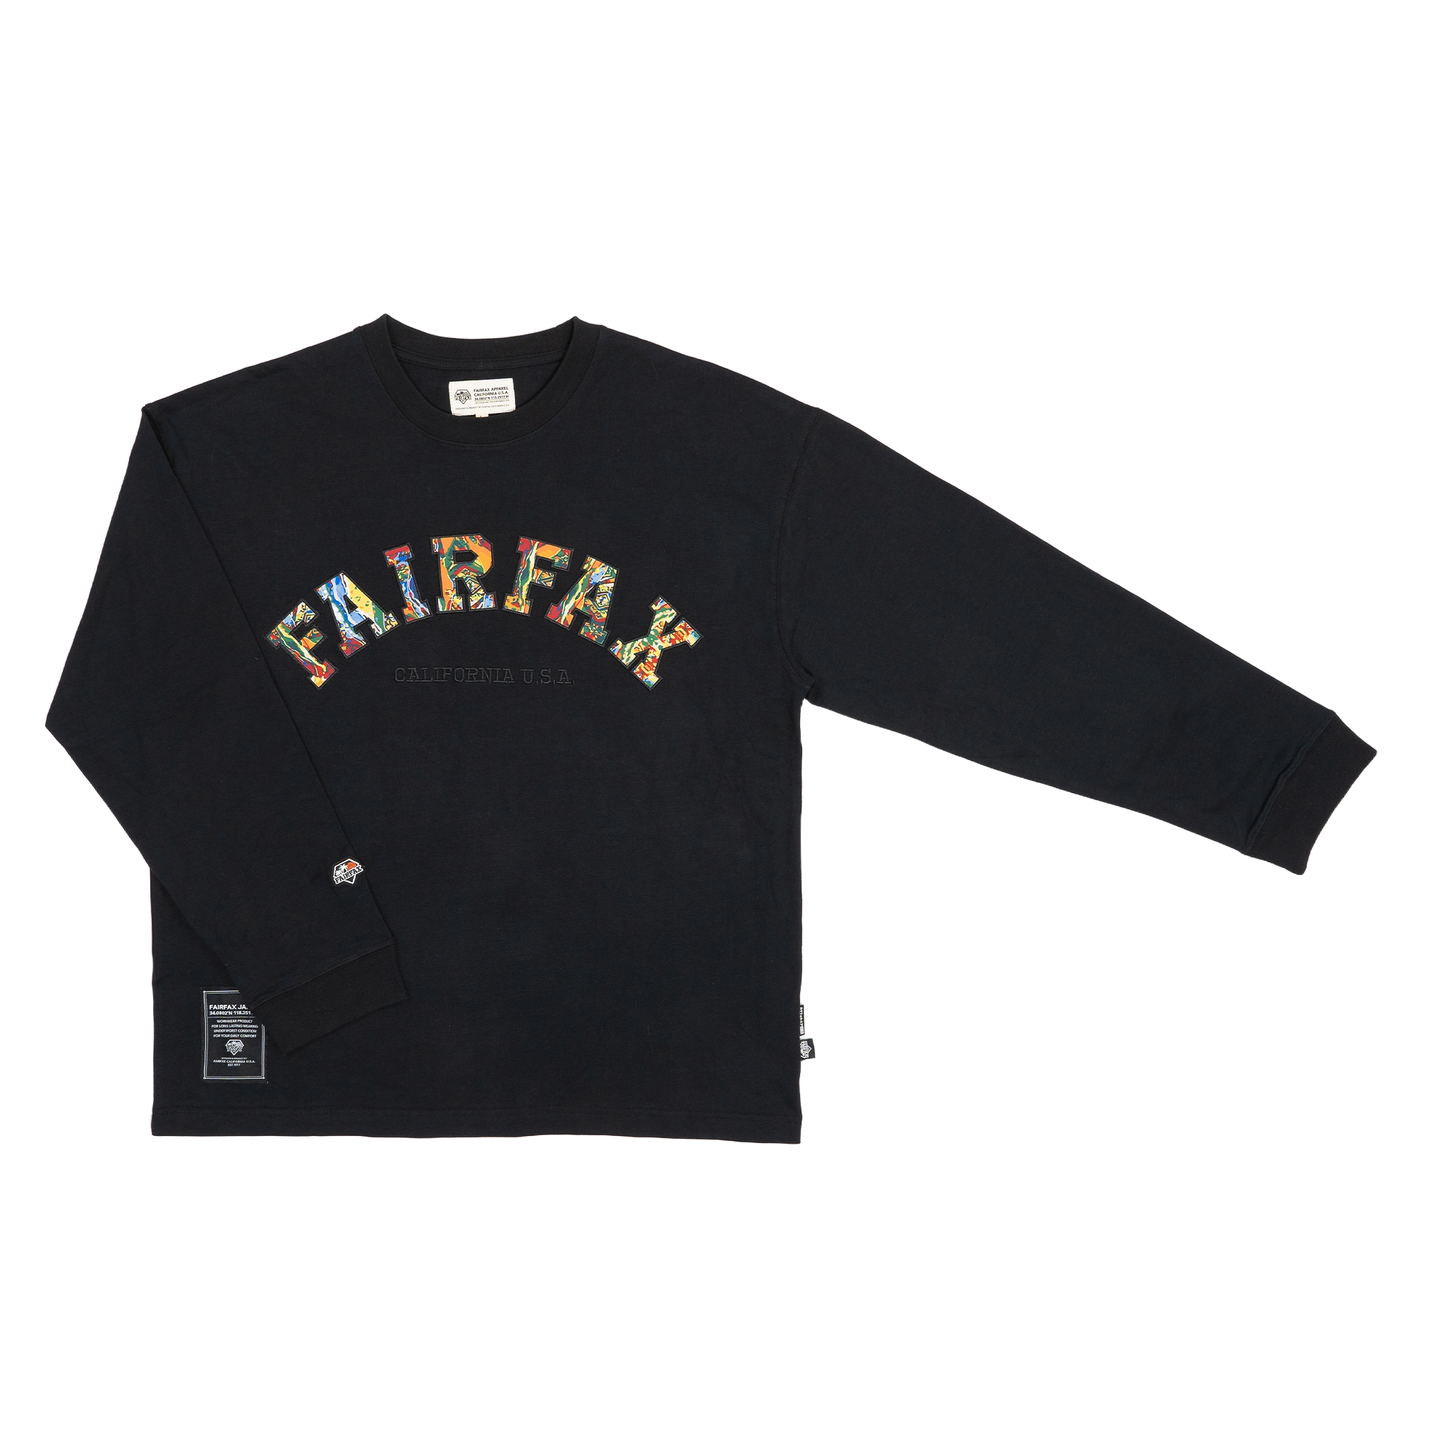 FXFW23-LS05 "reimagined" EMBROIDERED COLLEGE SLEEVE TEE